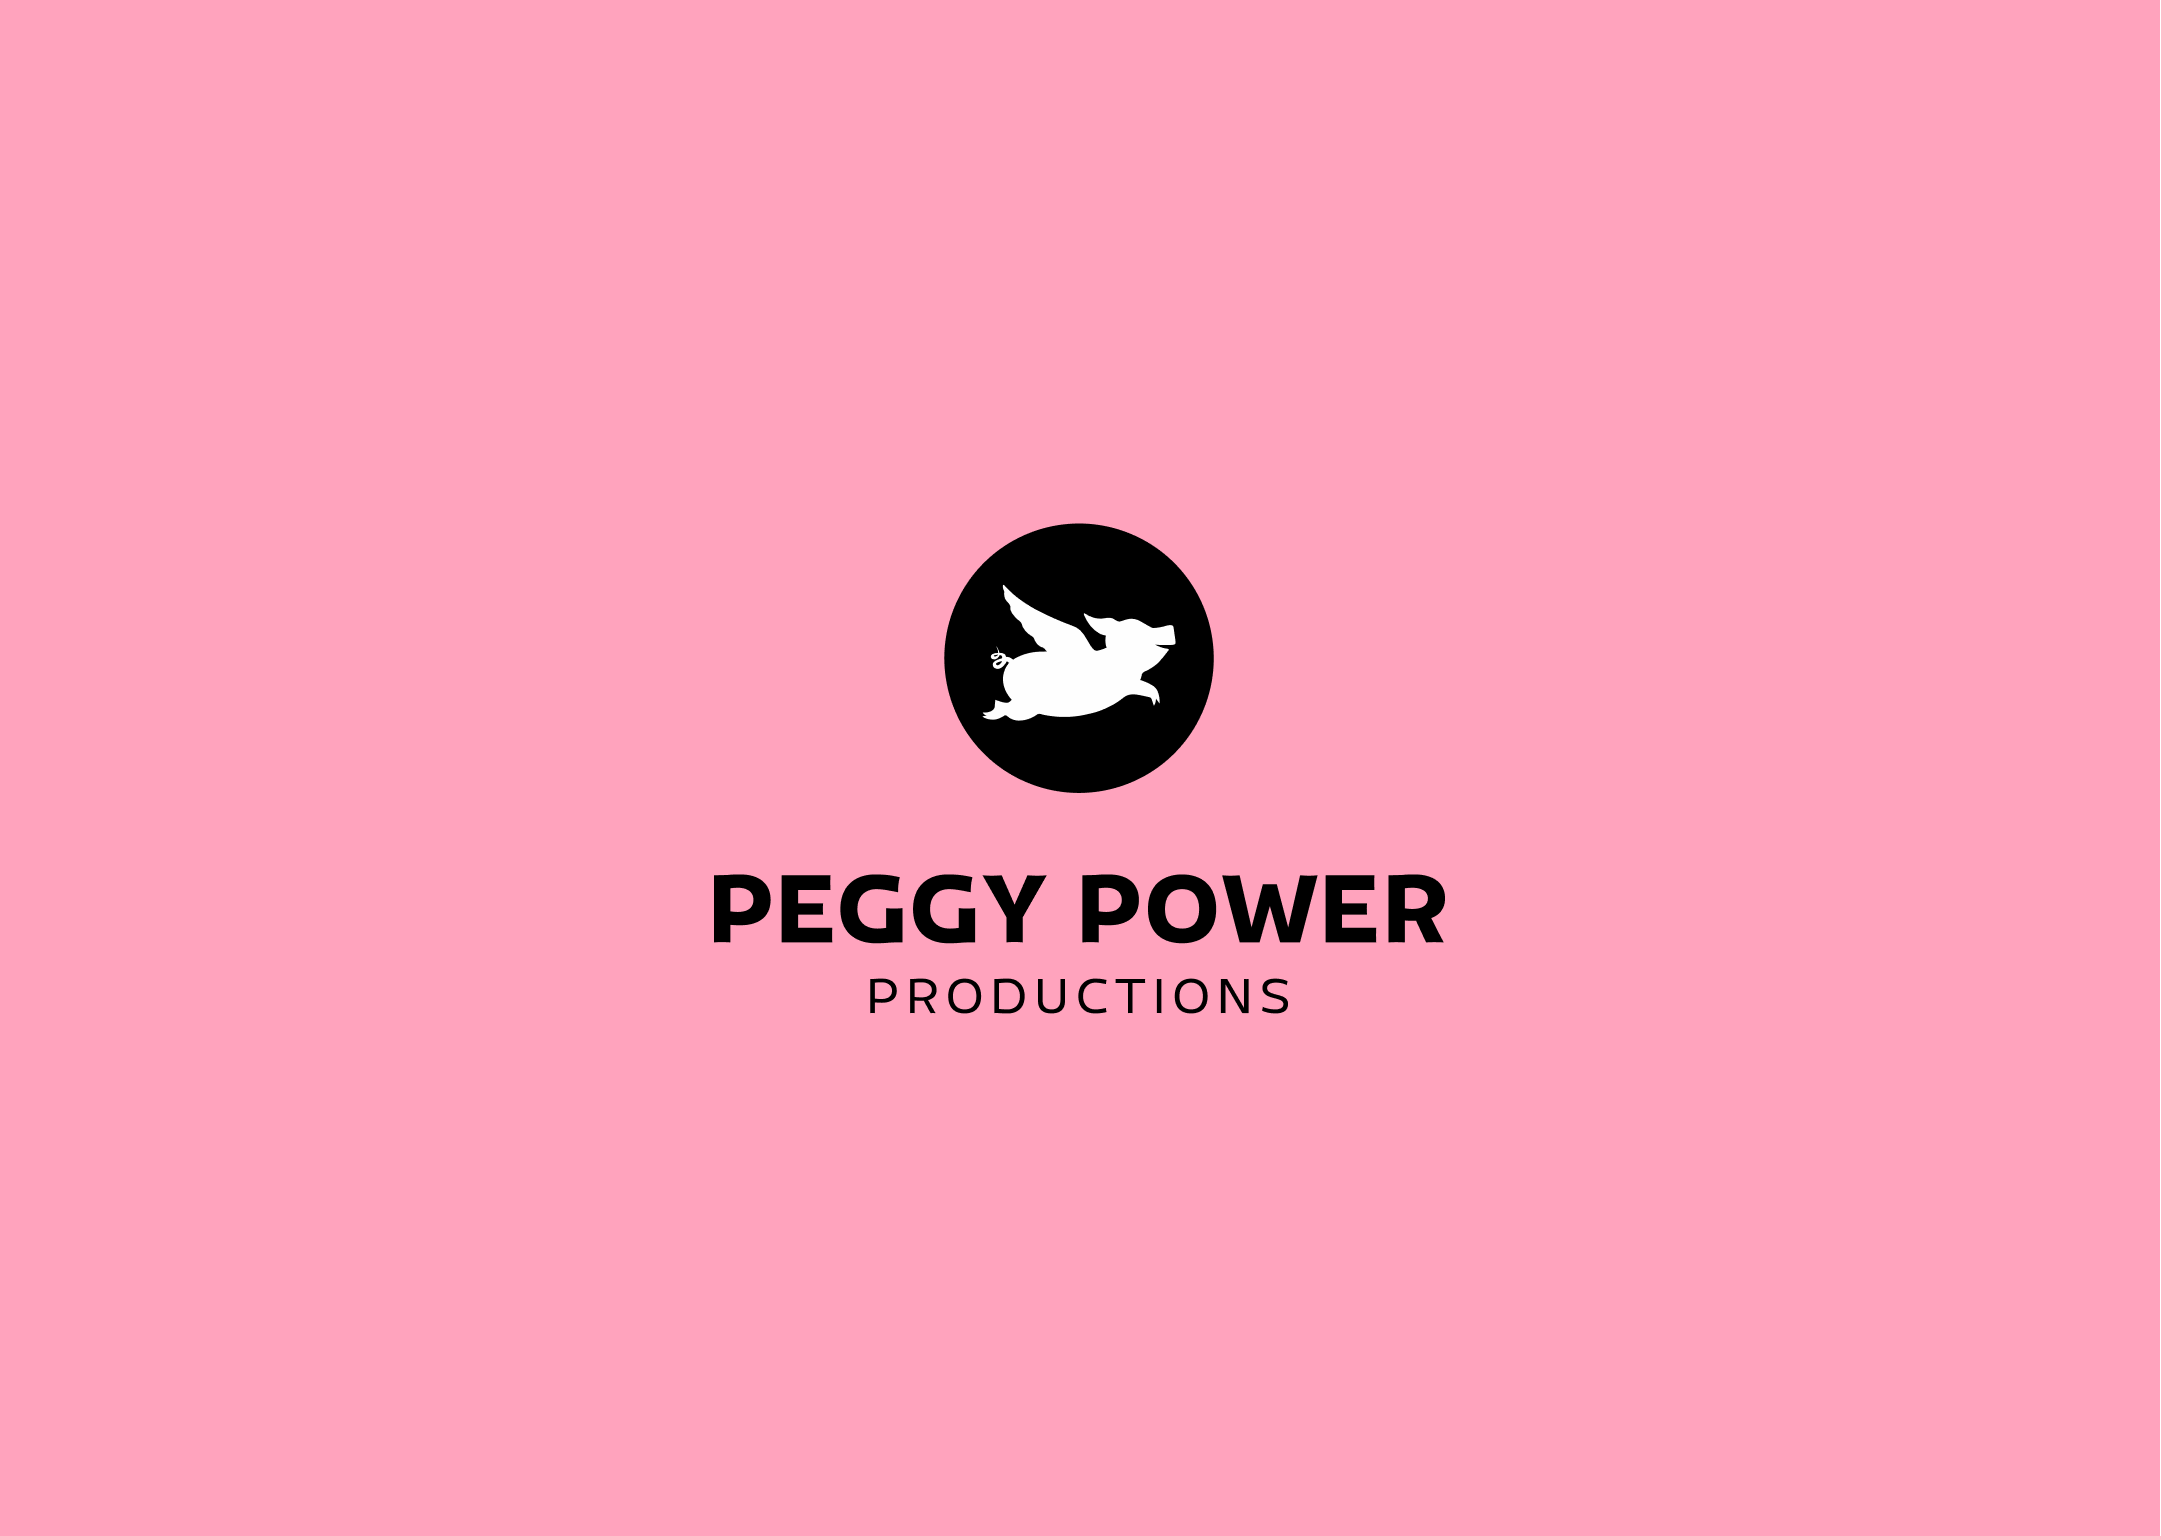 Peggy Power Productions